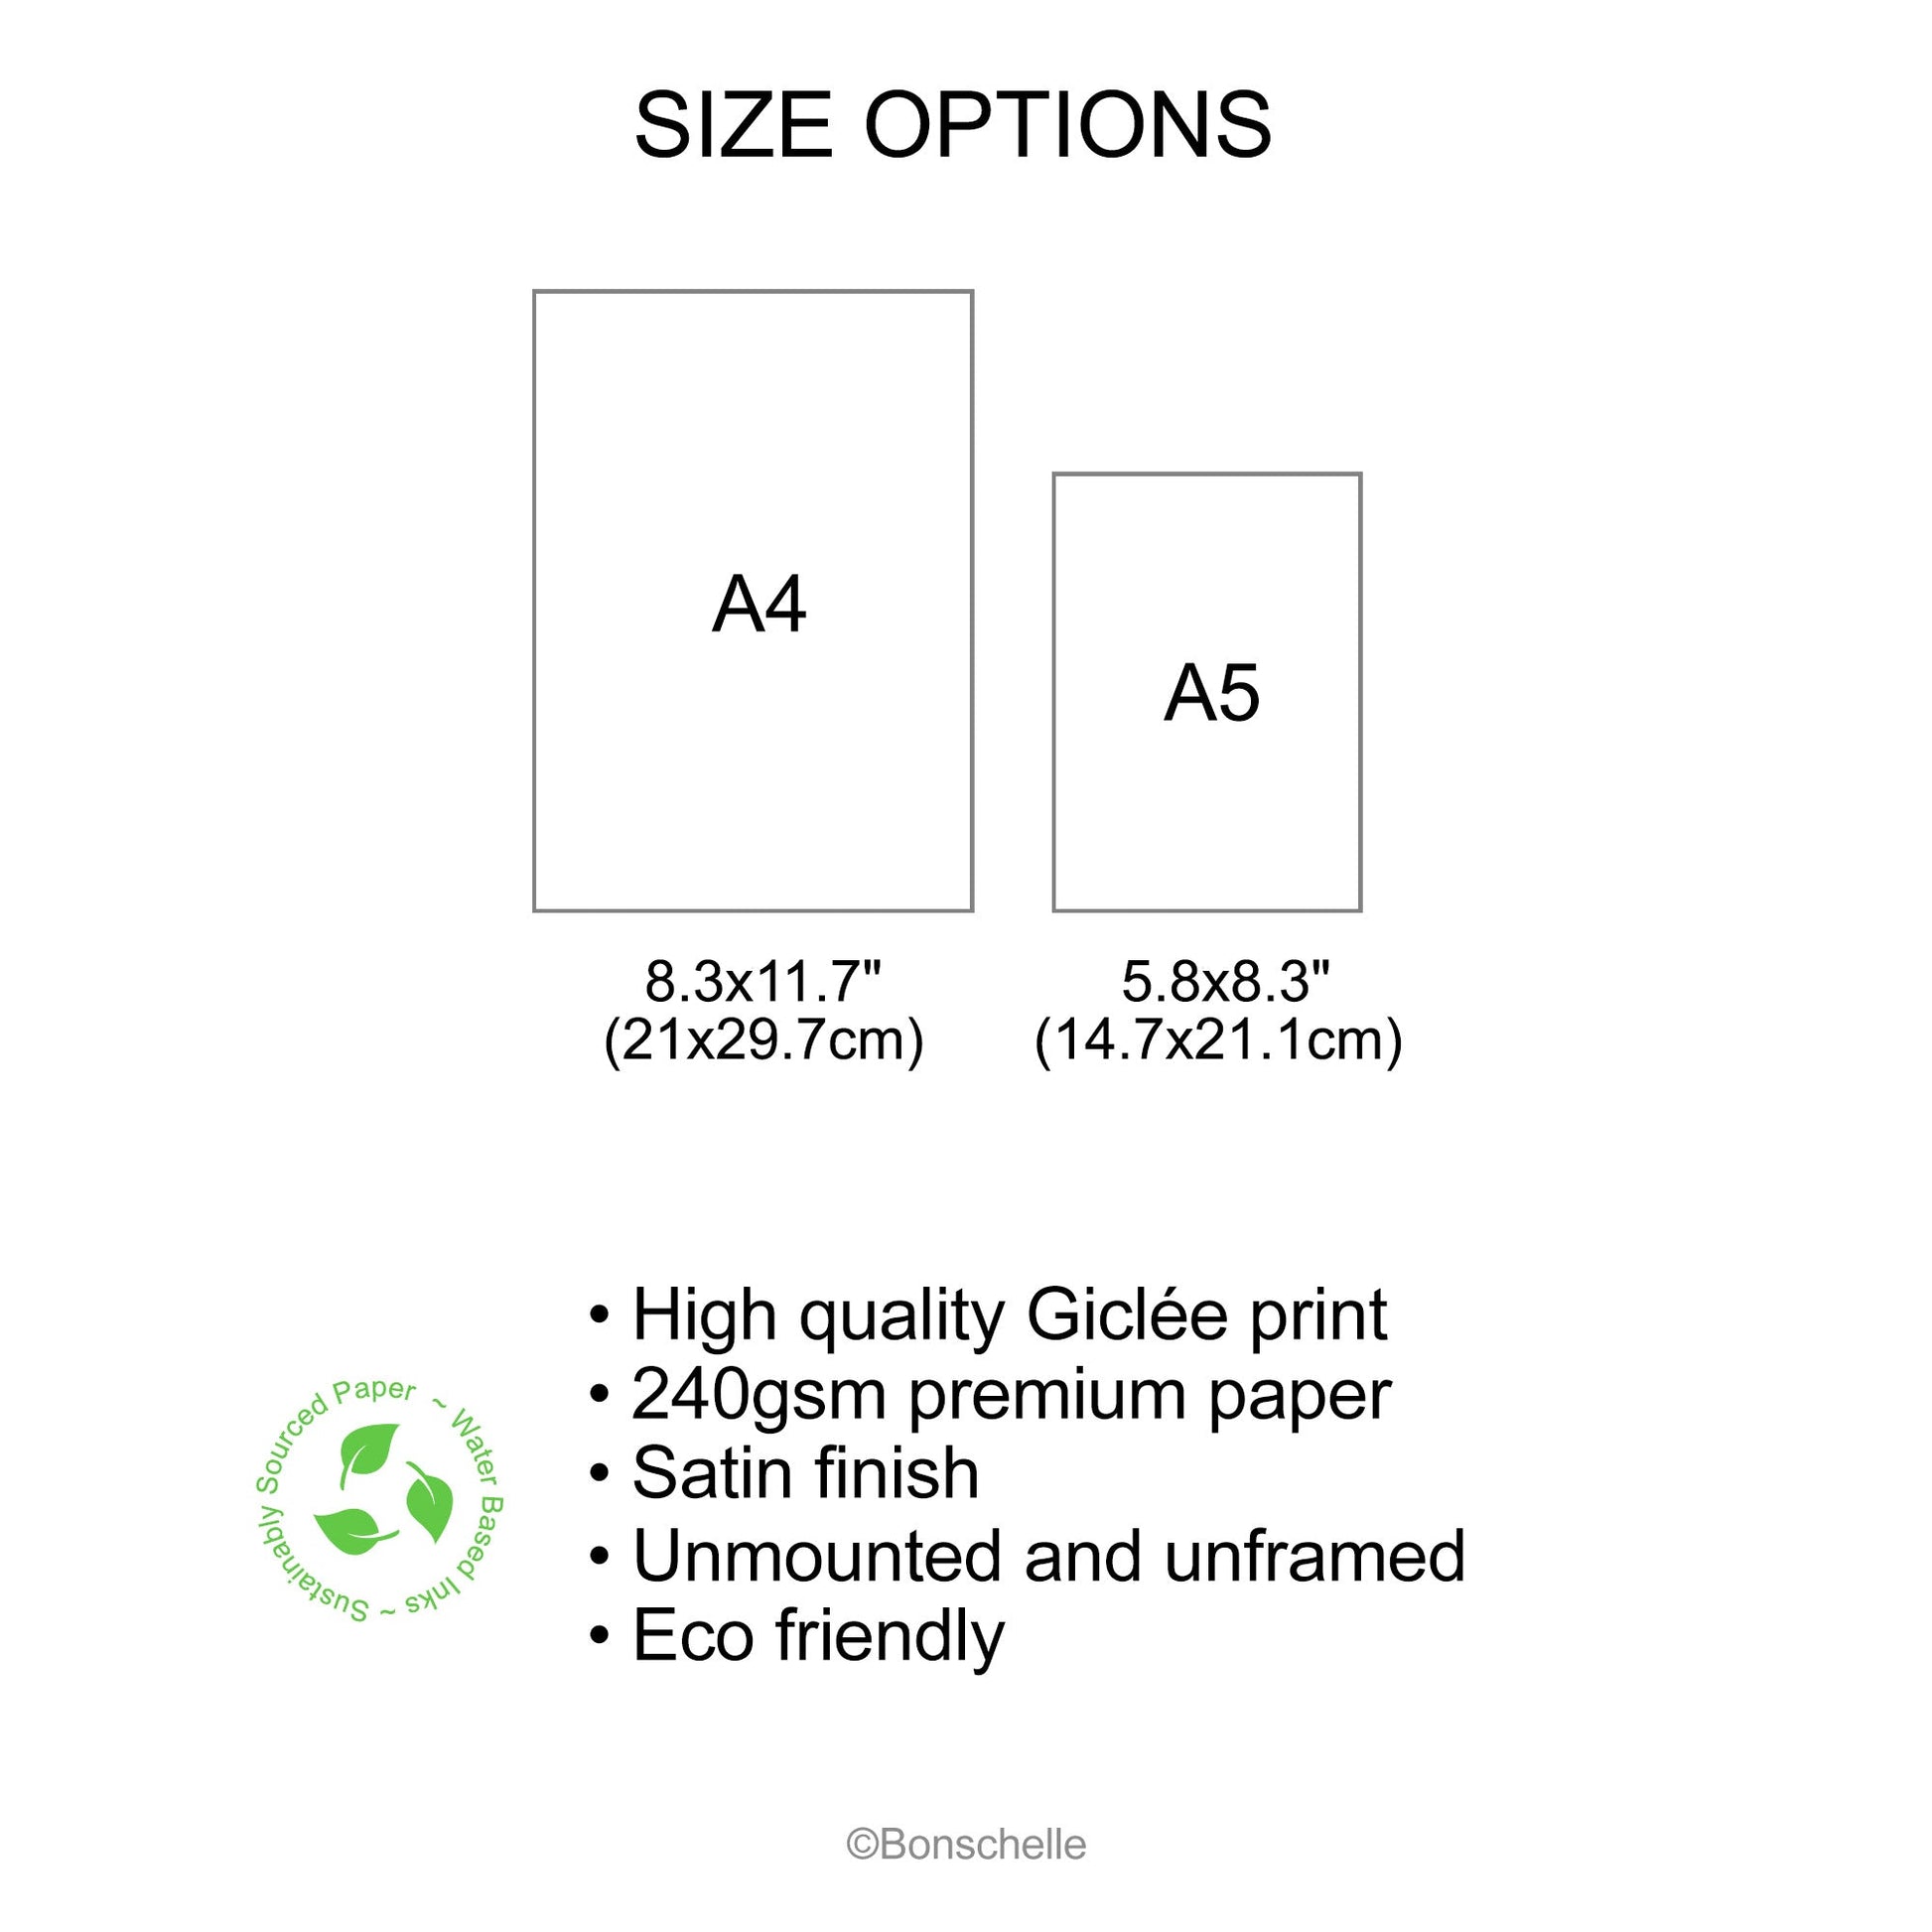 Product size options and product details